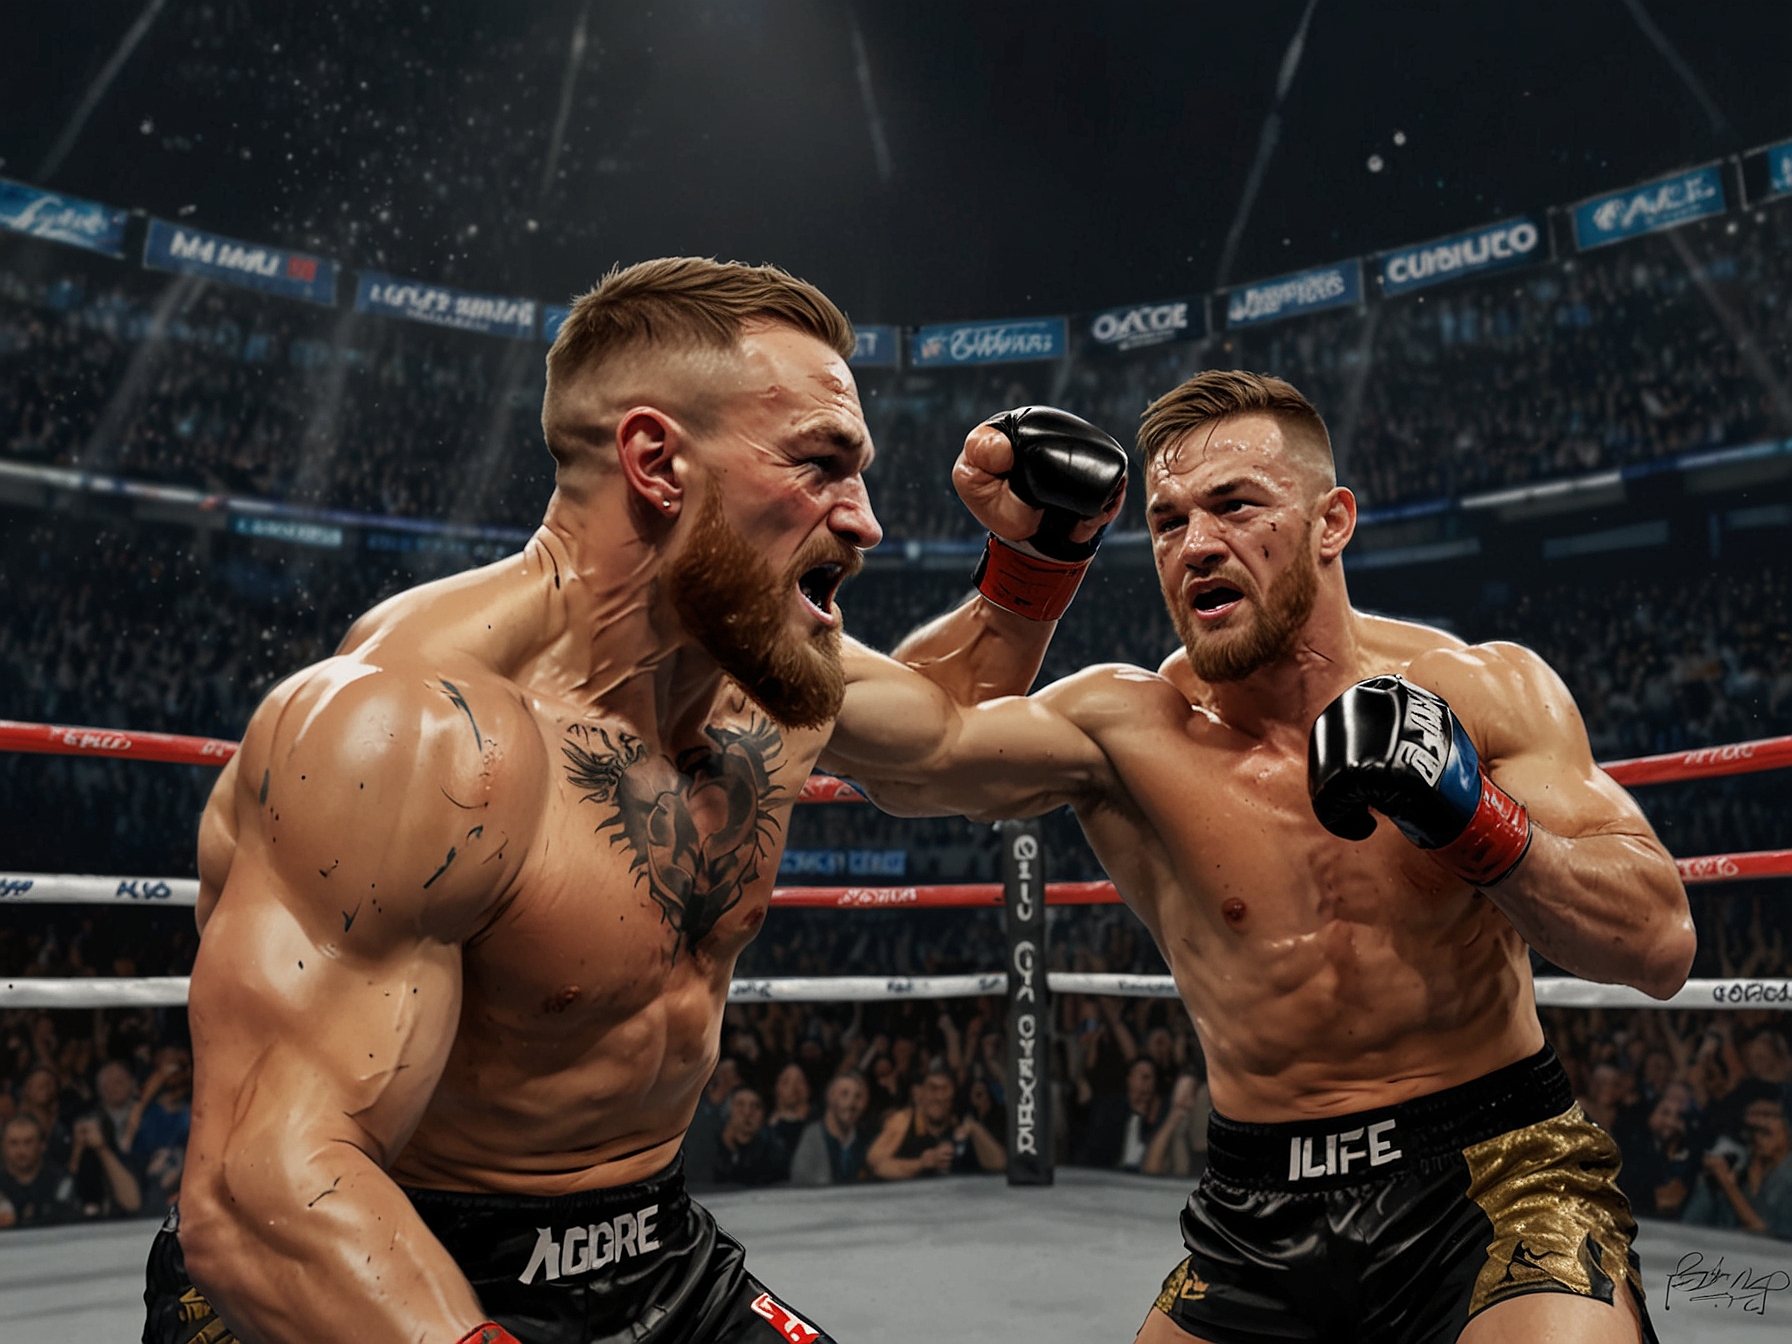 A dynamic promotional poster highlighting the postponed fight between Conor McGregor and Michael Chandler, capturing the excitement and anticipation for the rescheduled bout.